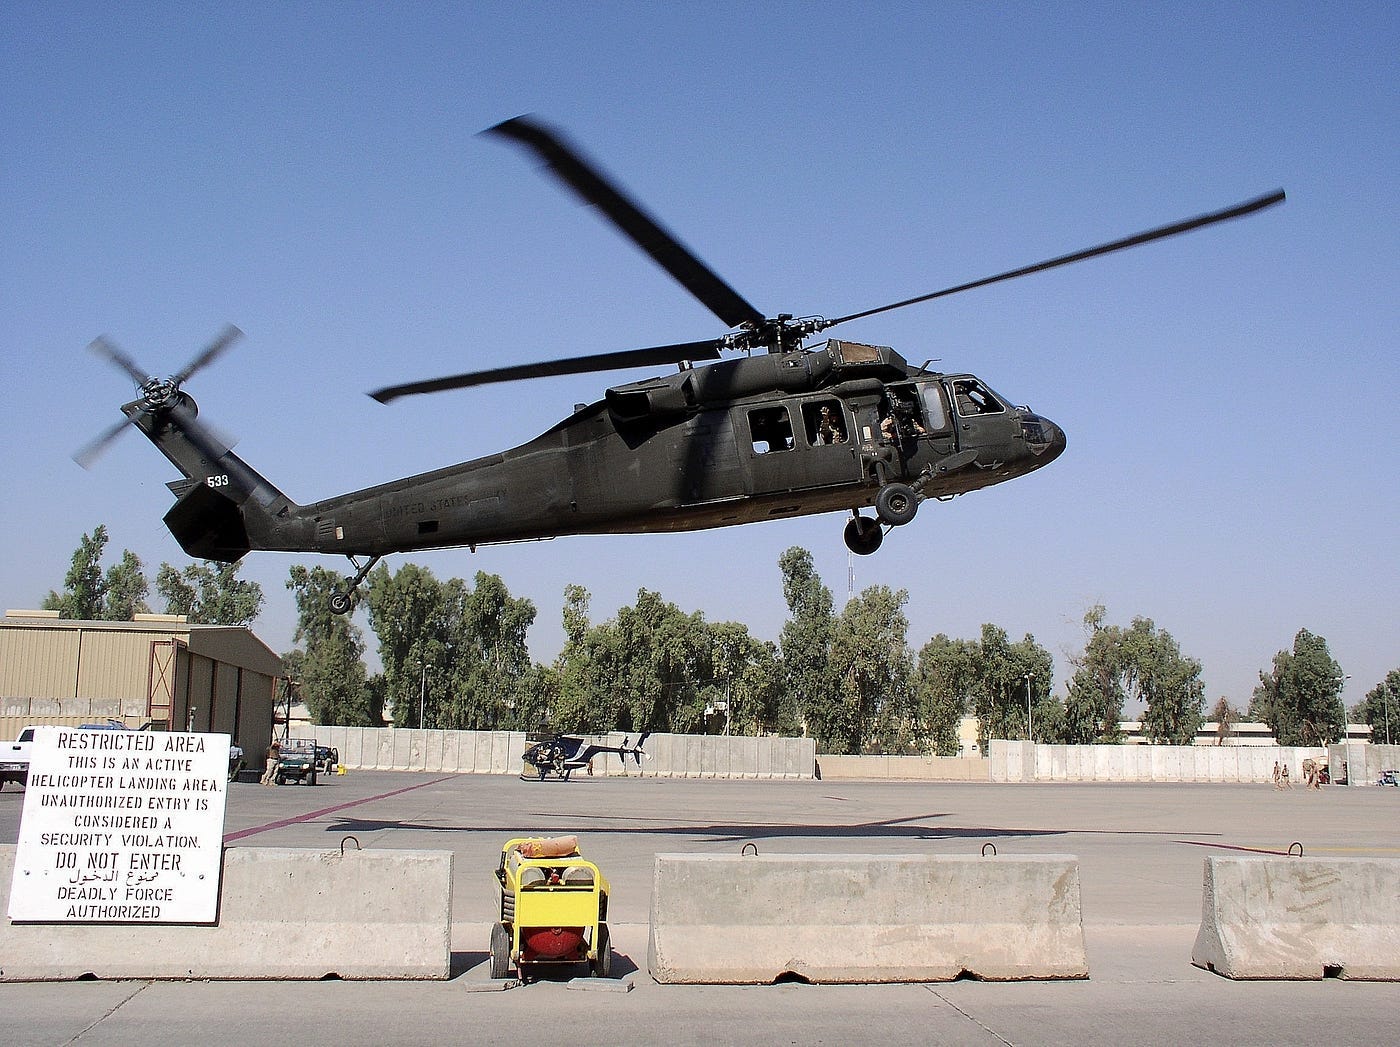 Blackhawk helicopter taking off from an American air base, sign warns of danger in both English and Arabic